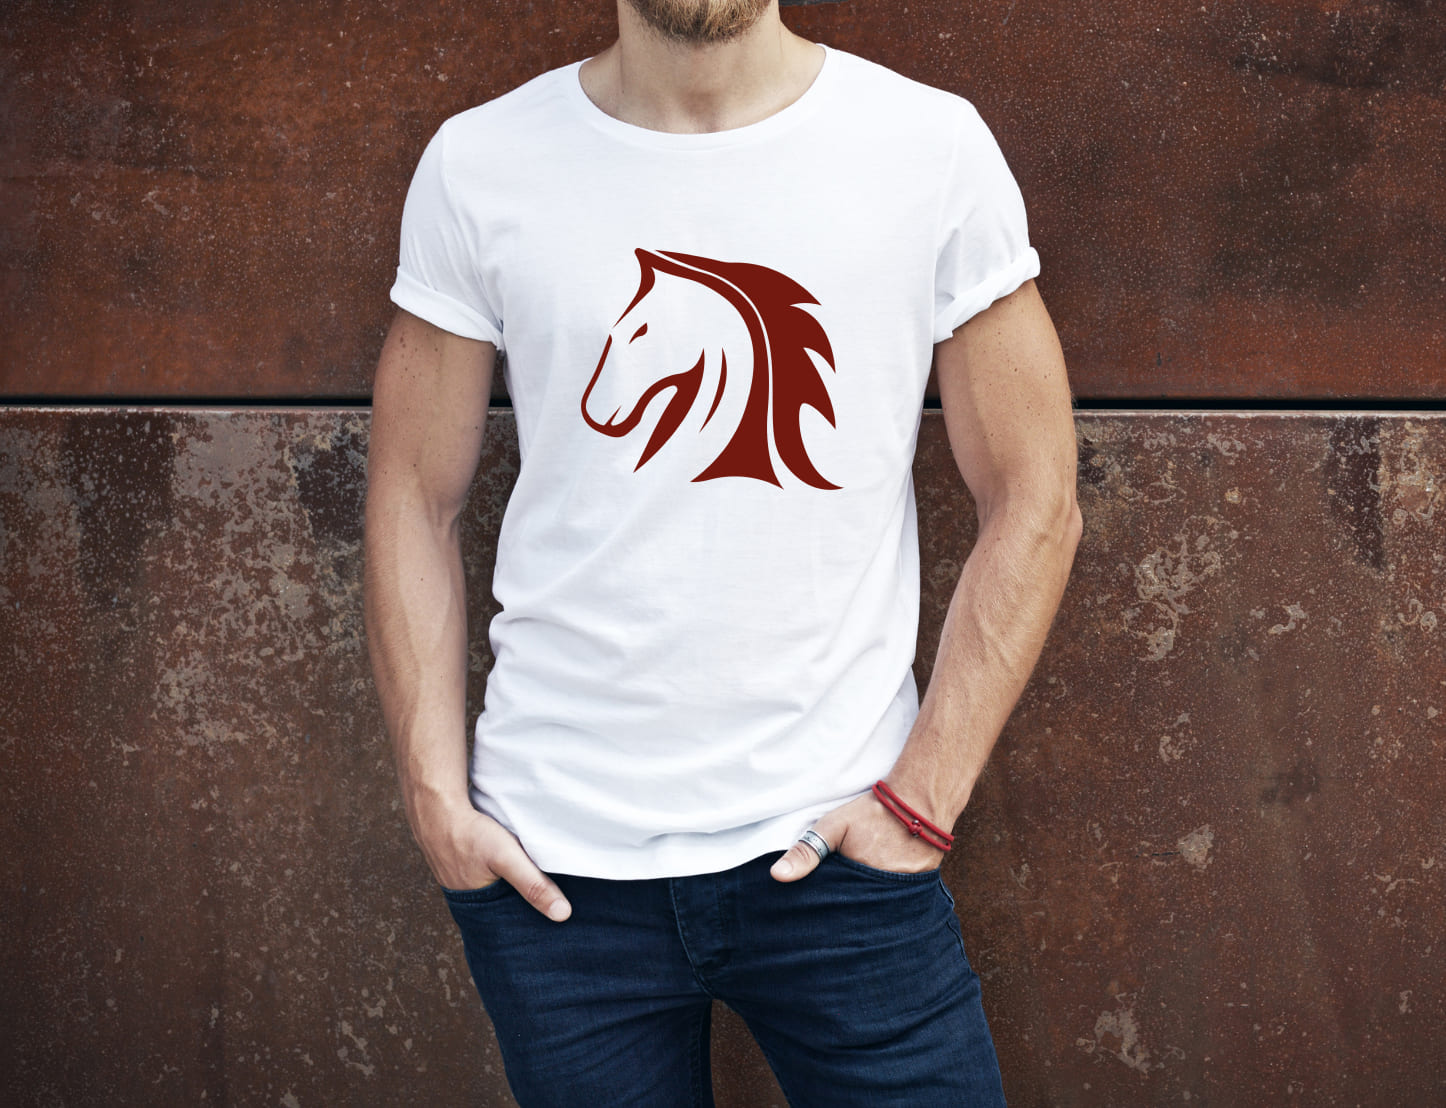 White t-shirt with a brown and white horse head on a man.